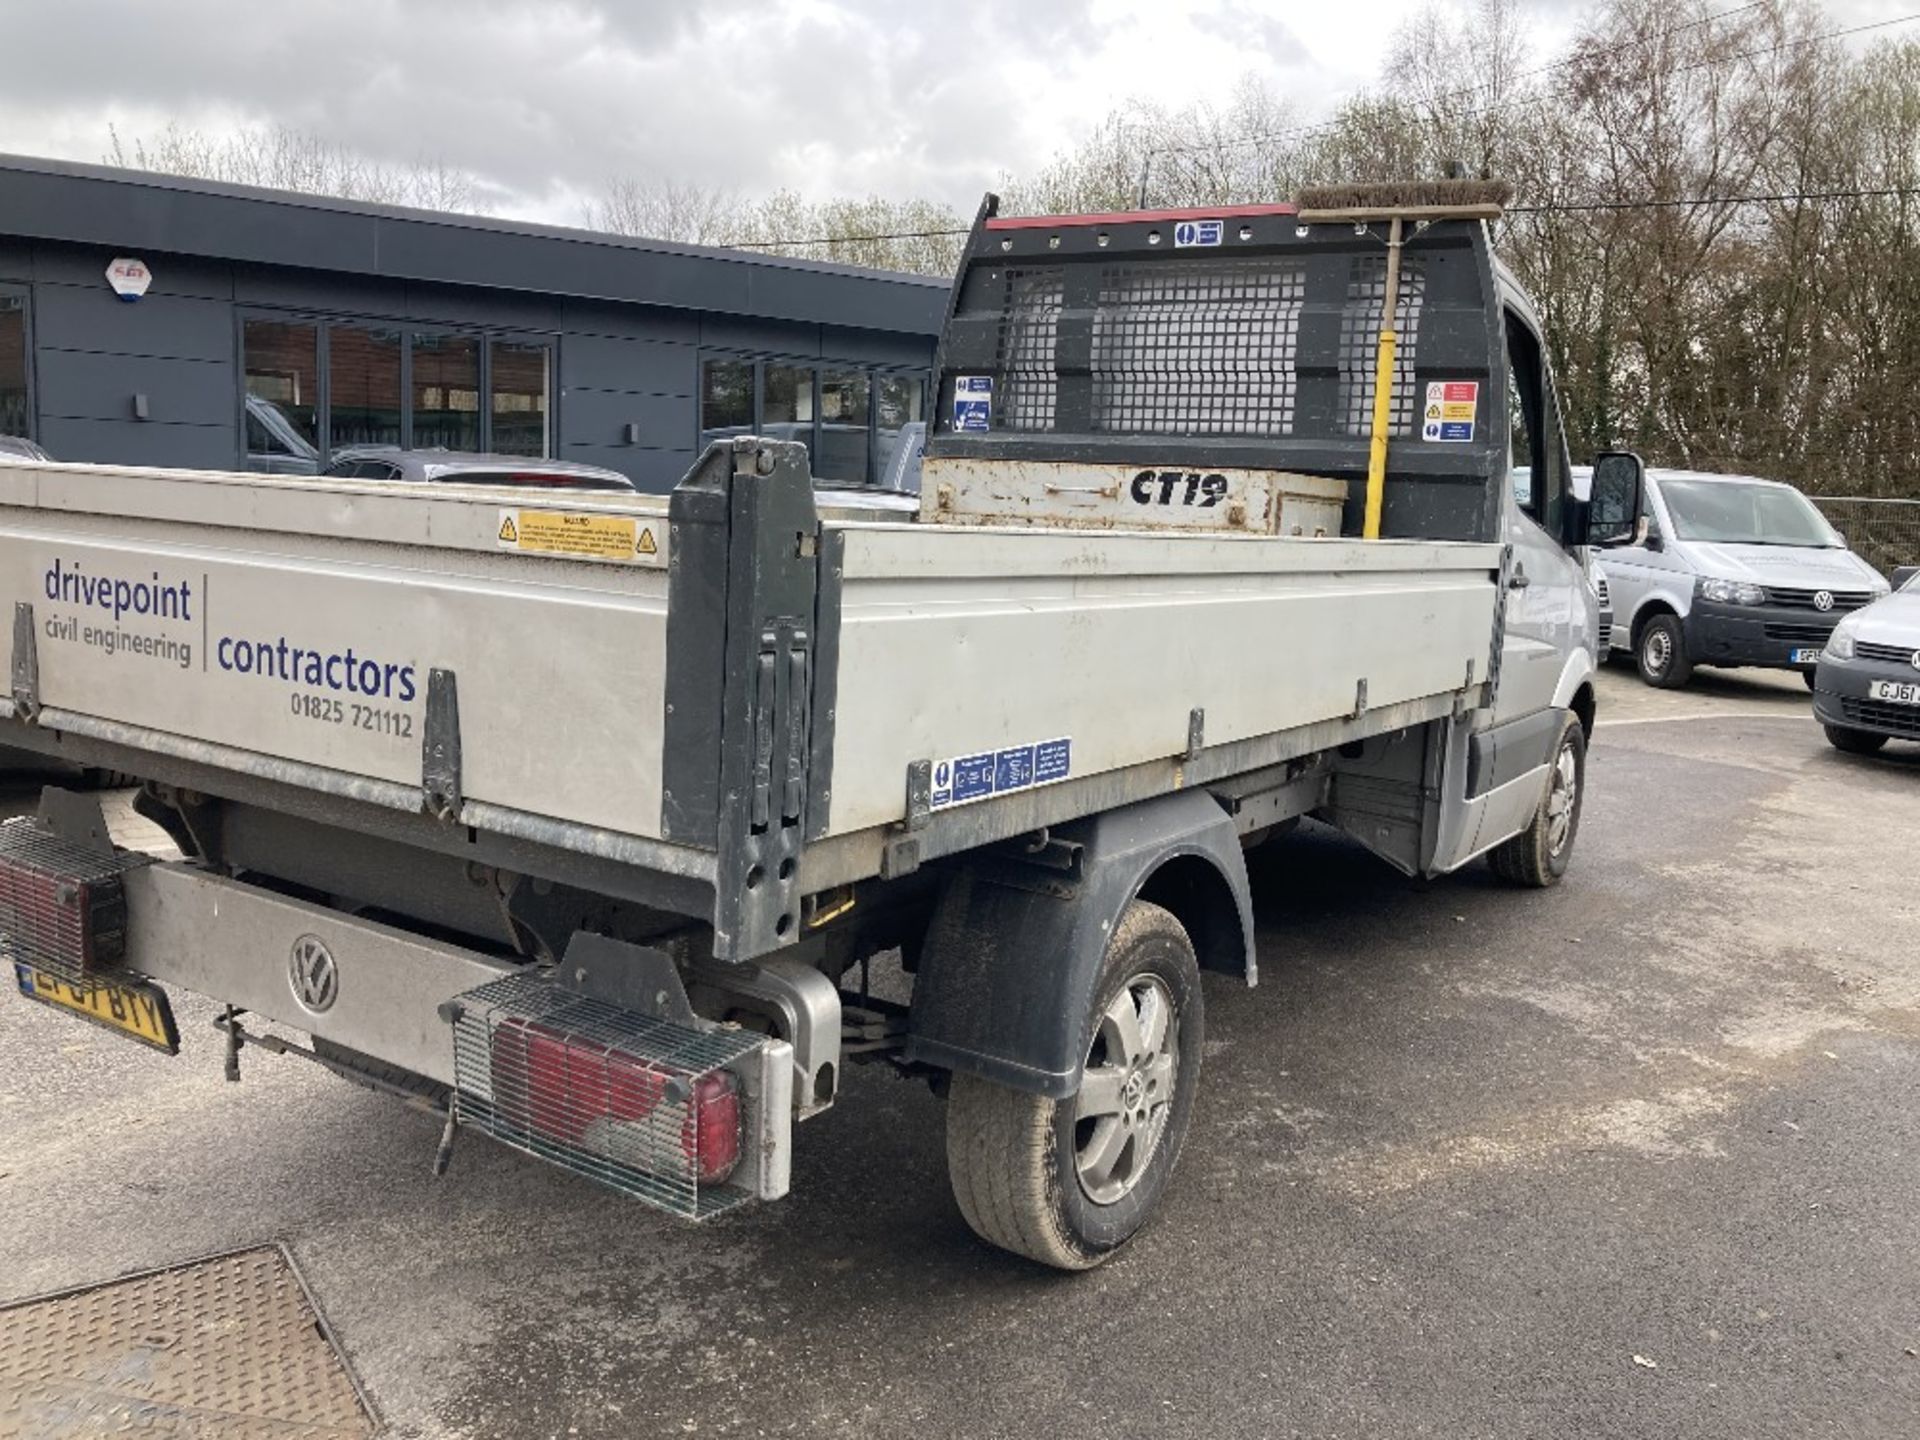 2017 Volkswagen Crafter CR35 TDI Bmt Dropside Tipper - Image 8 of 19